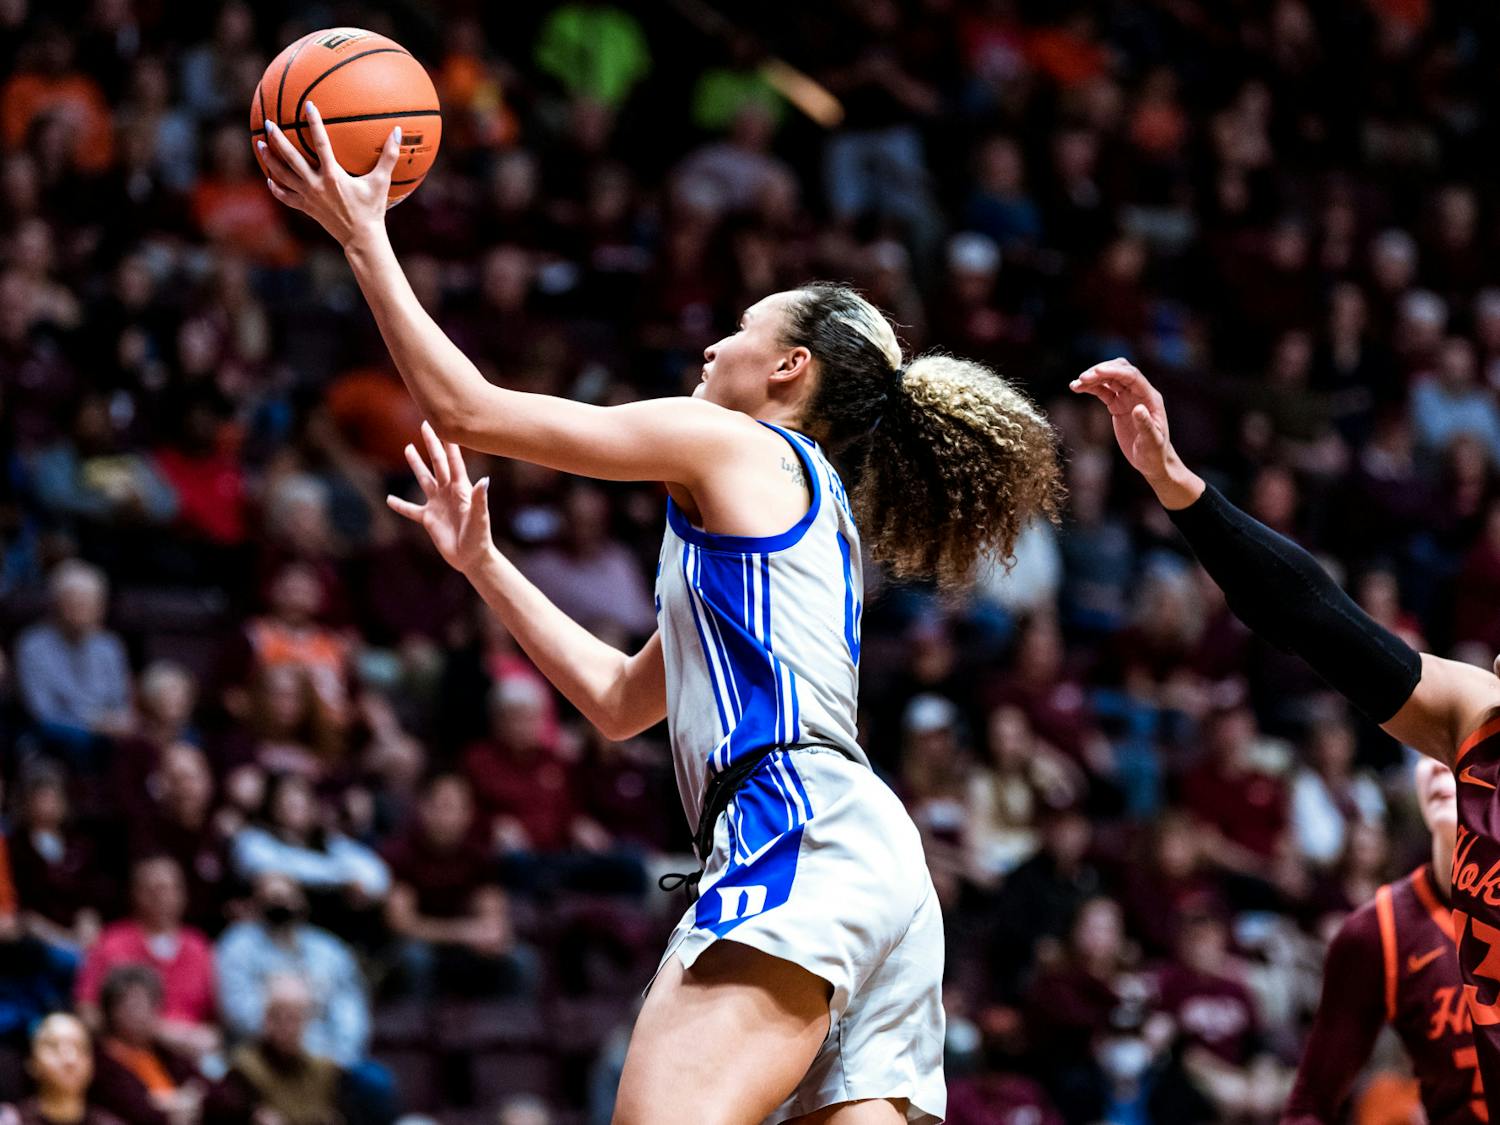 Senior guard Celeste Taylor led Duke with 12 points in the loss at Virginia Tech.